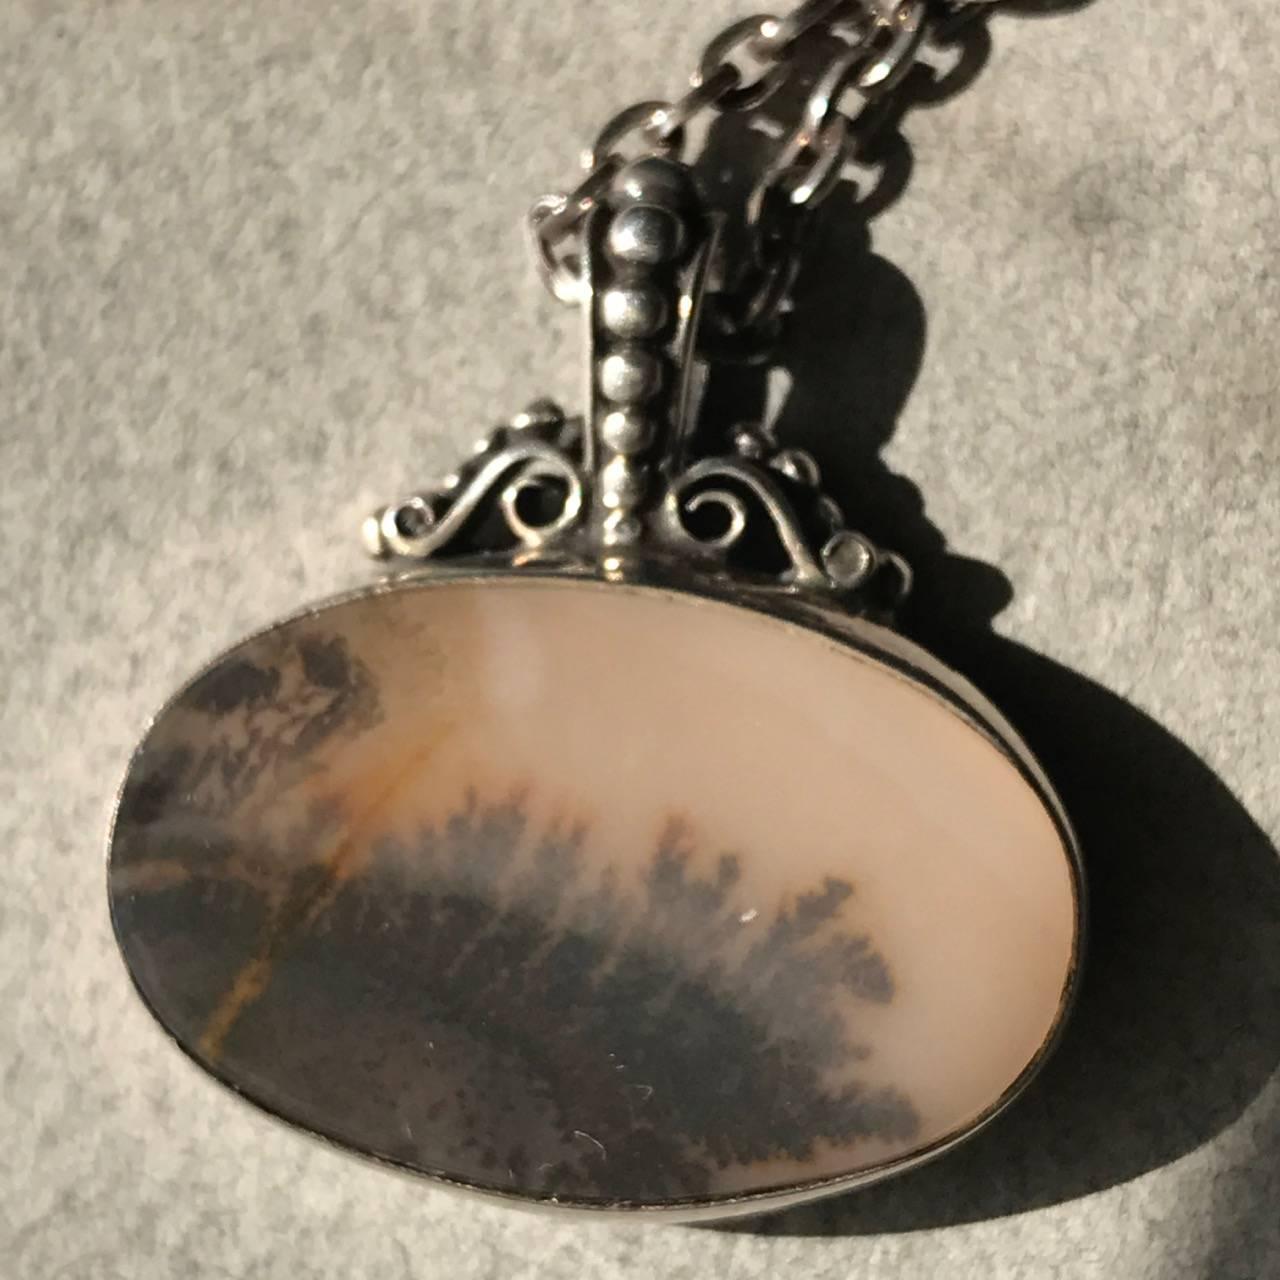 Royal Copenhagen Sterling Silver and Landscape Agate Necklace

Sterling silver bezel featuring a charming landscape agate highlighting warm earth tones.

Made as a limited edition in the 1980's.

Complimentary gift box and FREE shipping included.